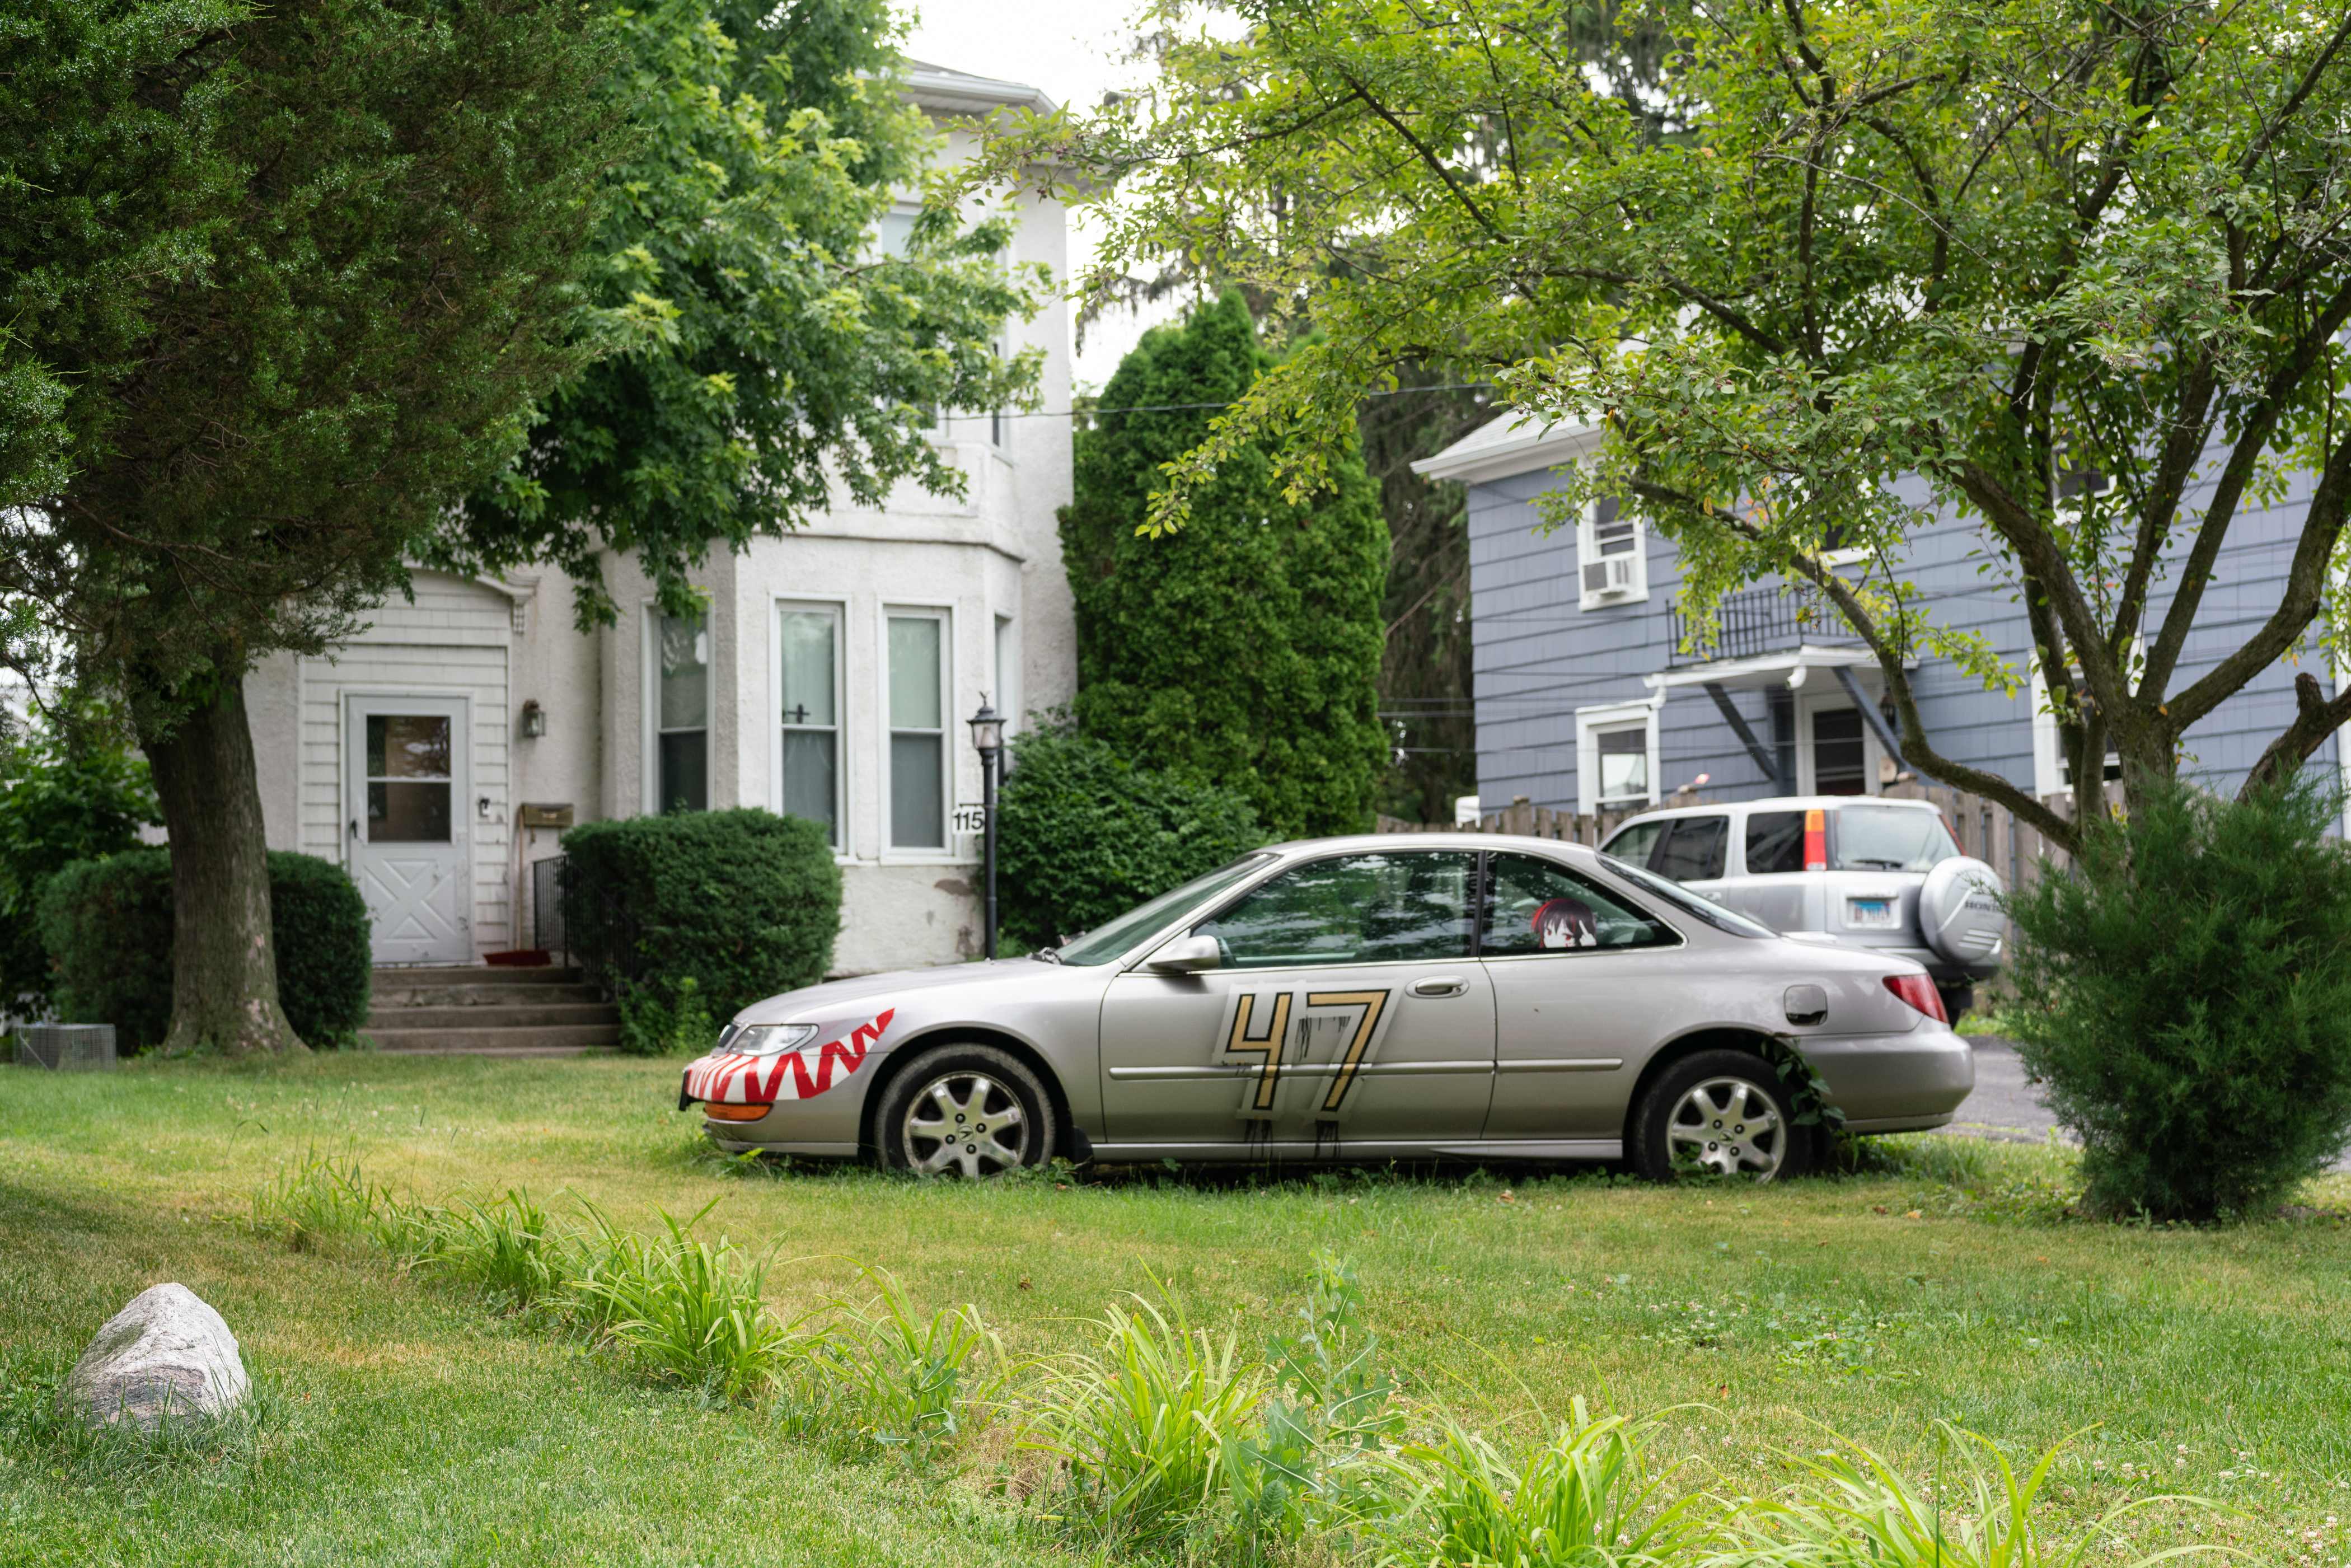 A car with the number 47 is parked outside the home of the suspect